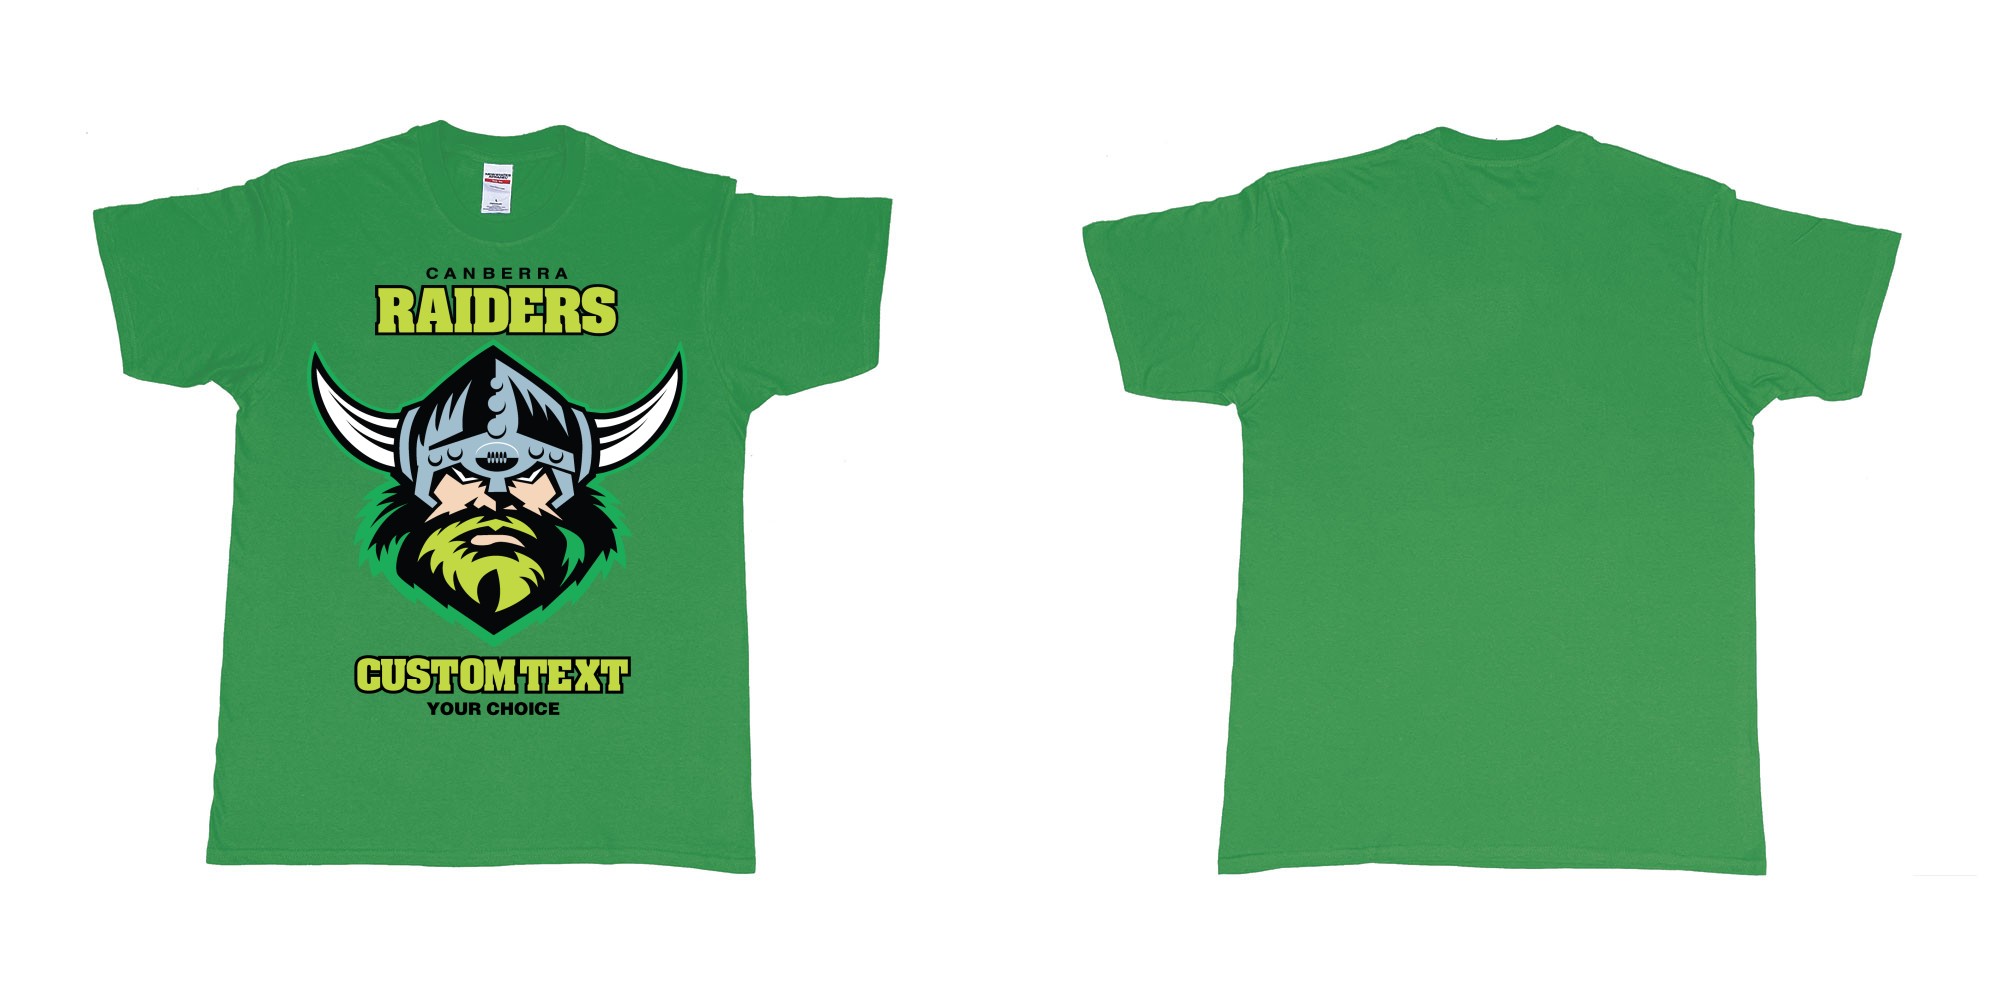 Custom tshirt design canberra raiders nrl logo own printed text near you in fabric color irish-green choice your own text made in Bali by The Pirate Way